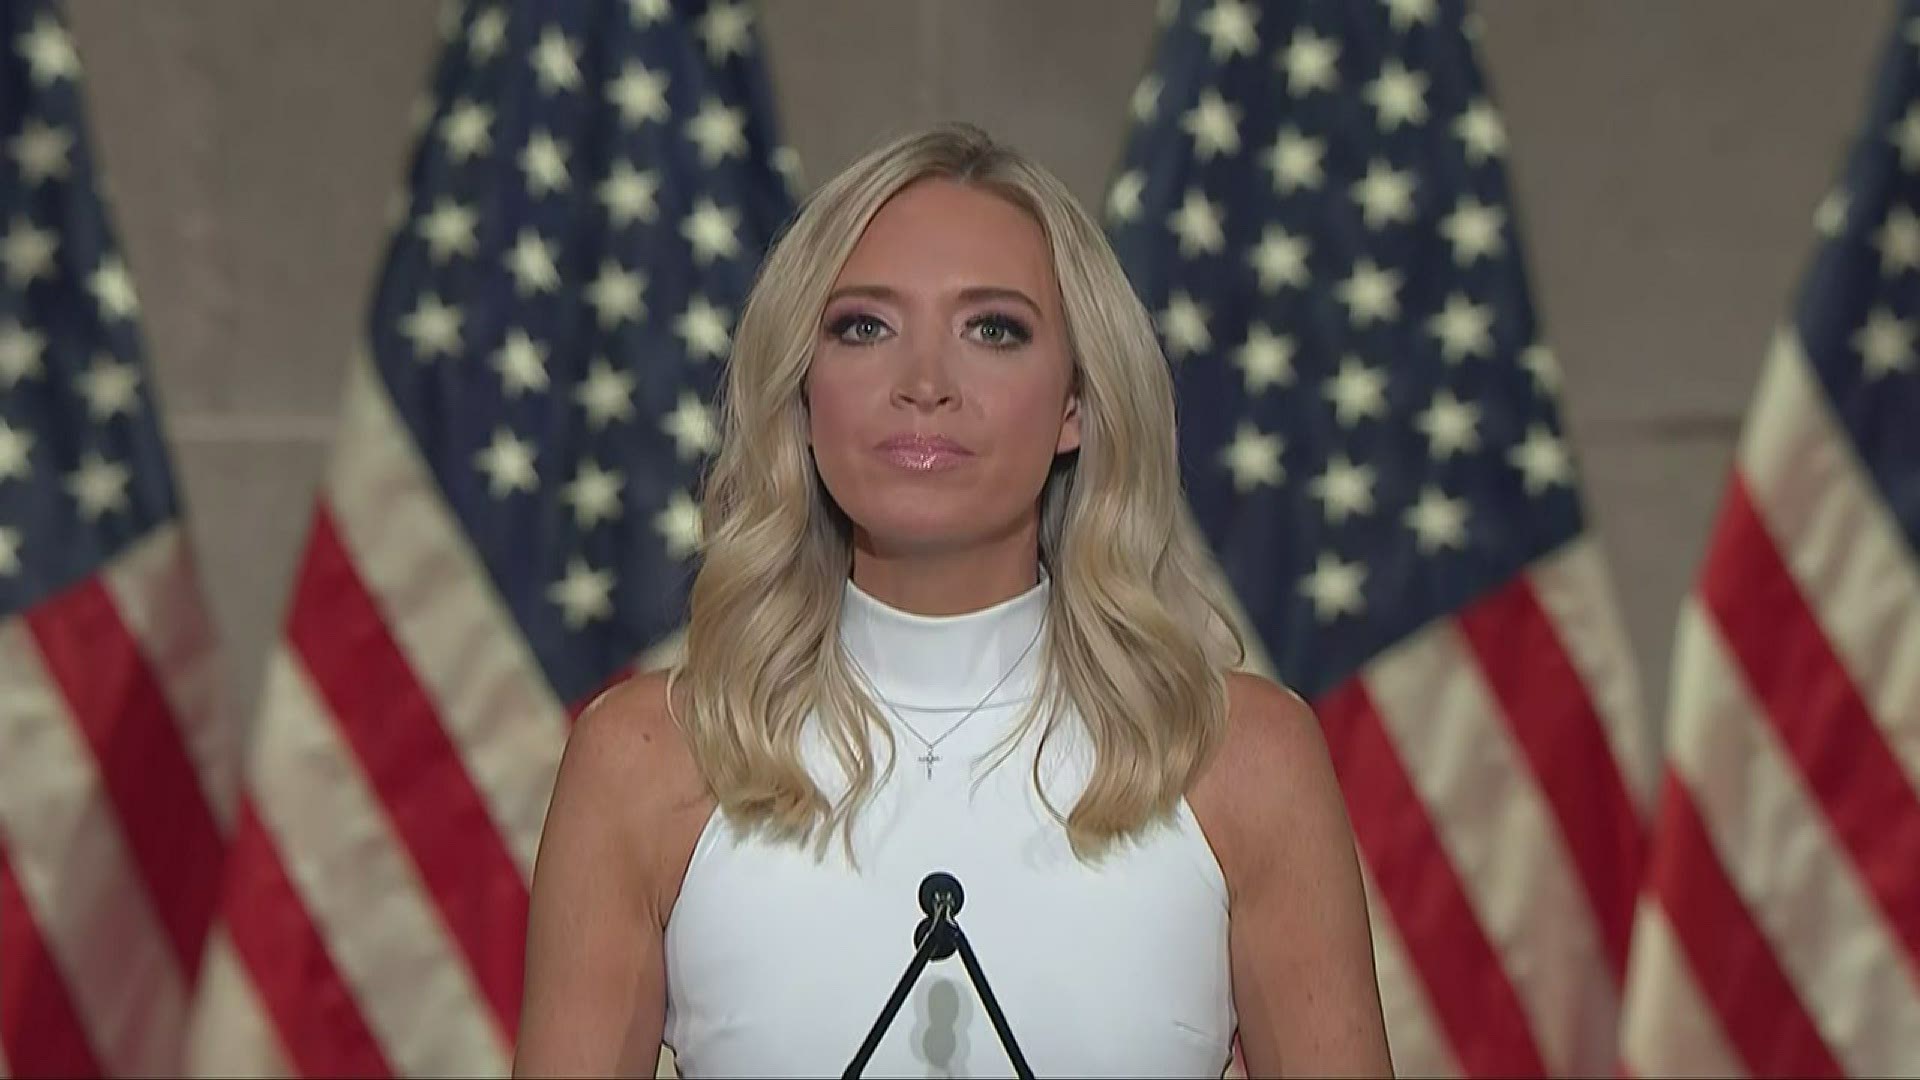 White House spokeswoman Kayleigh McEnany told her story about her mastectomy during her speech at the 2020 Republican National Convention.